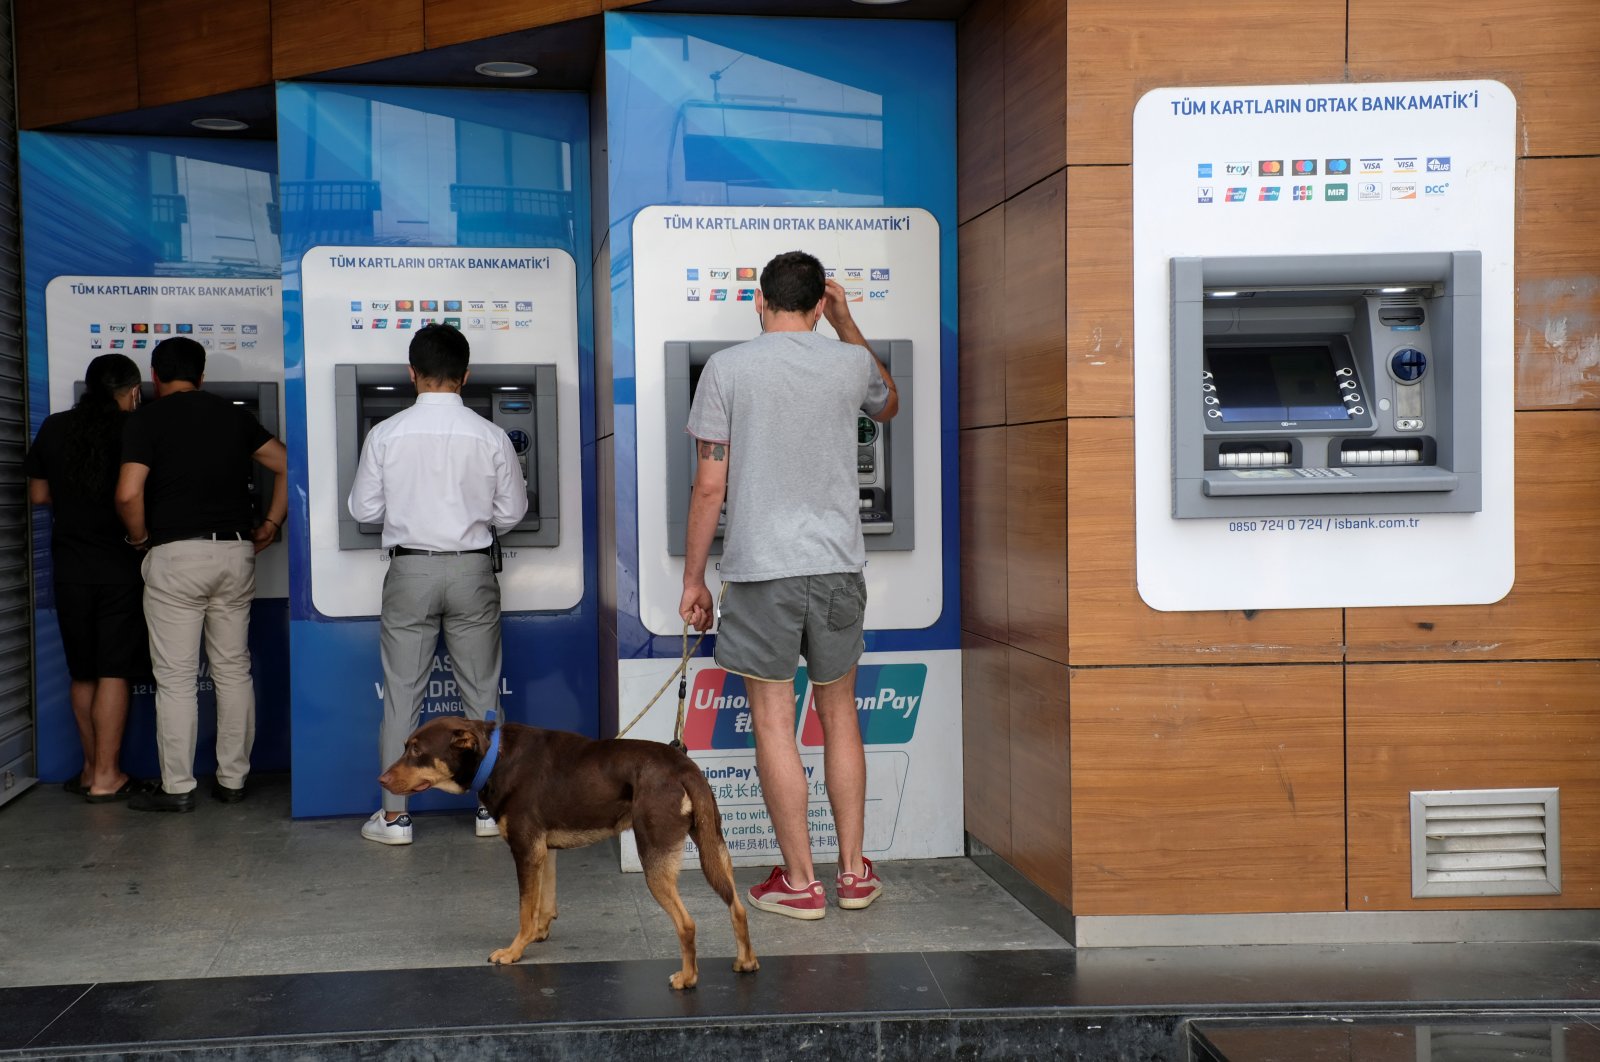 People withdraw money from ATM machines at the main shopping and pedestrian street of Istiklal in central Istanbul, Turkey, July 25, 2020. (Reuters Photo)